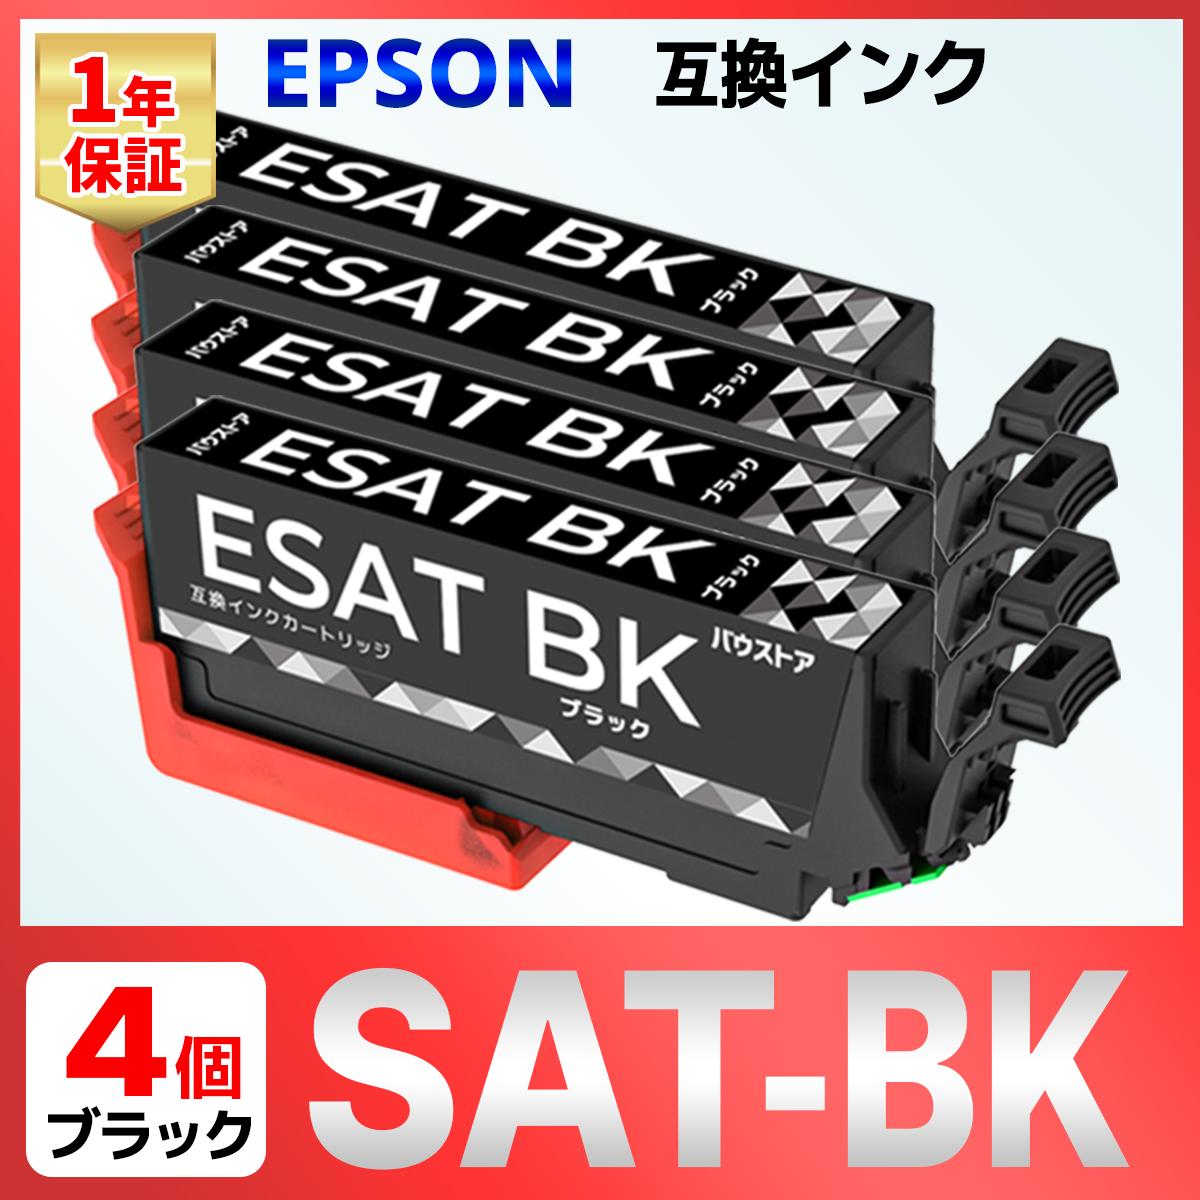 SAT-6CL SAT サツマイモ 互換 インク ブラック ４個 EPSON エプソン EP-712A EP-713A EP-714A EP-715A EP-716A EP-812A EP-813A EP-814A EP-815A EP-816A